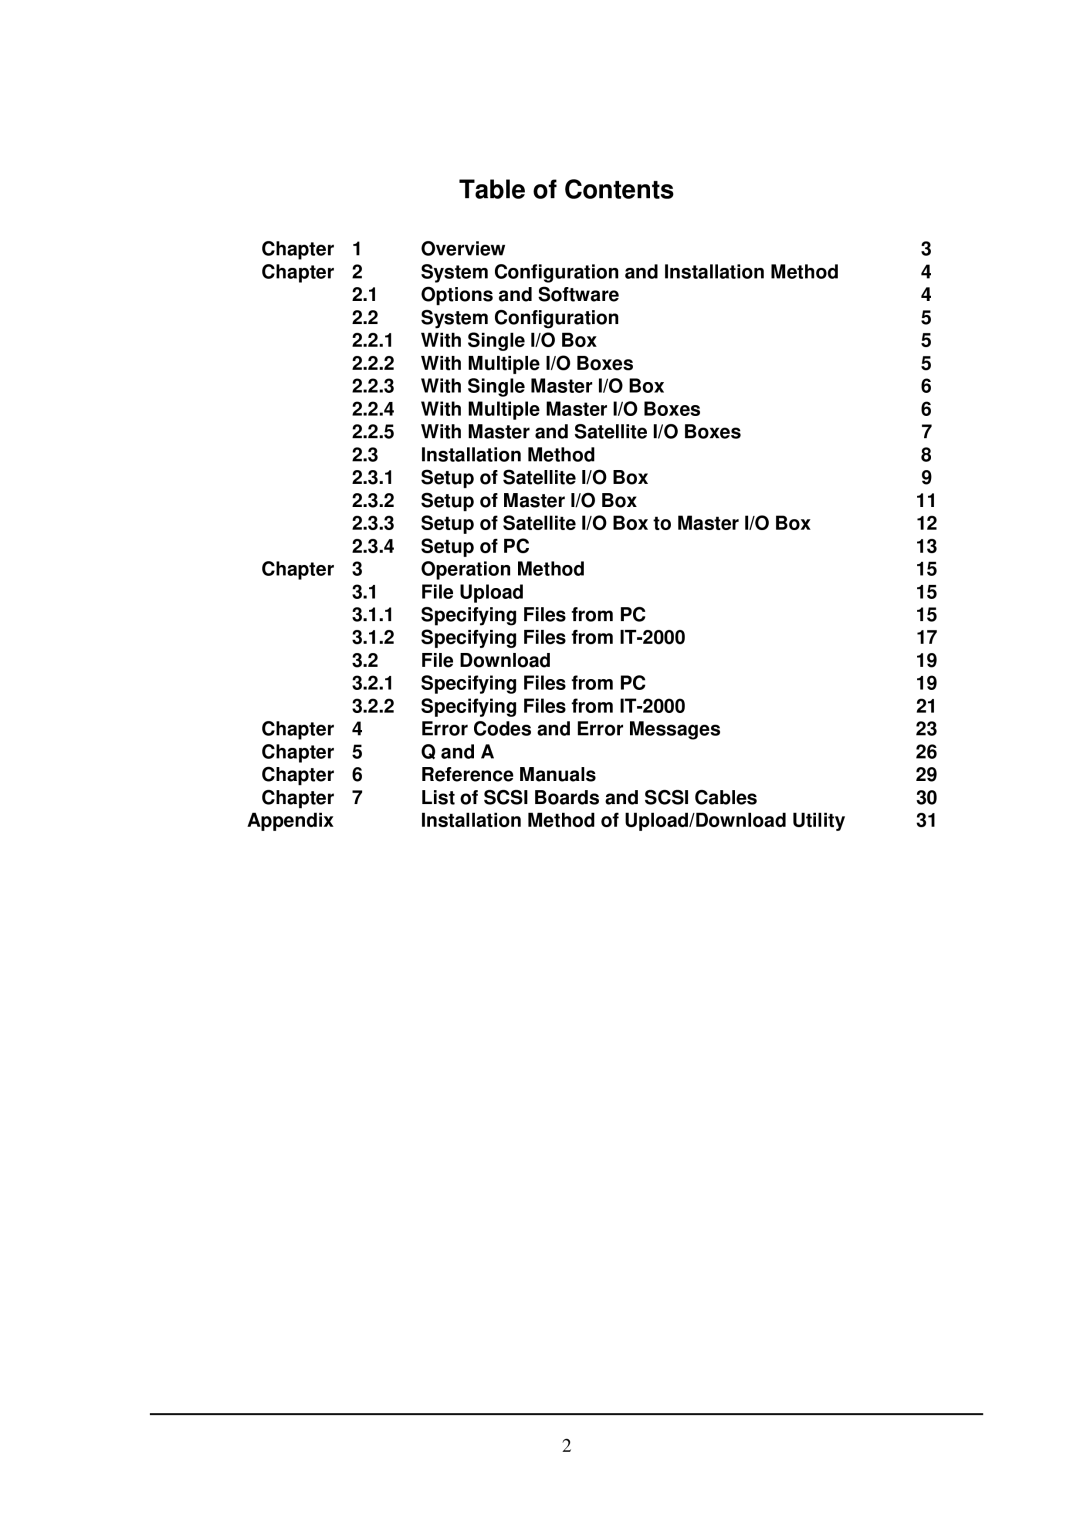 Casio IT-2000 installation manual Table of Contents, Appendix 